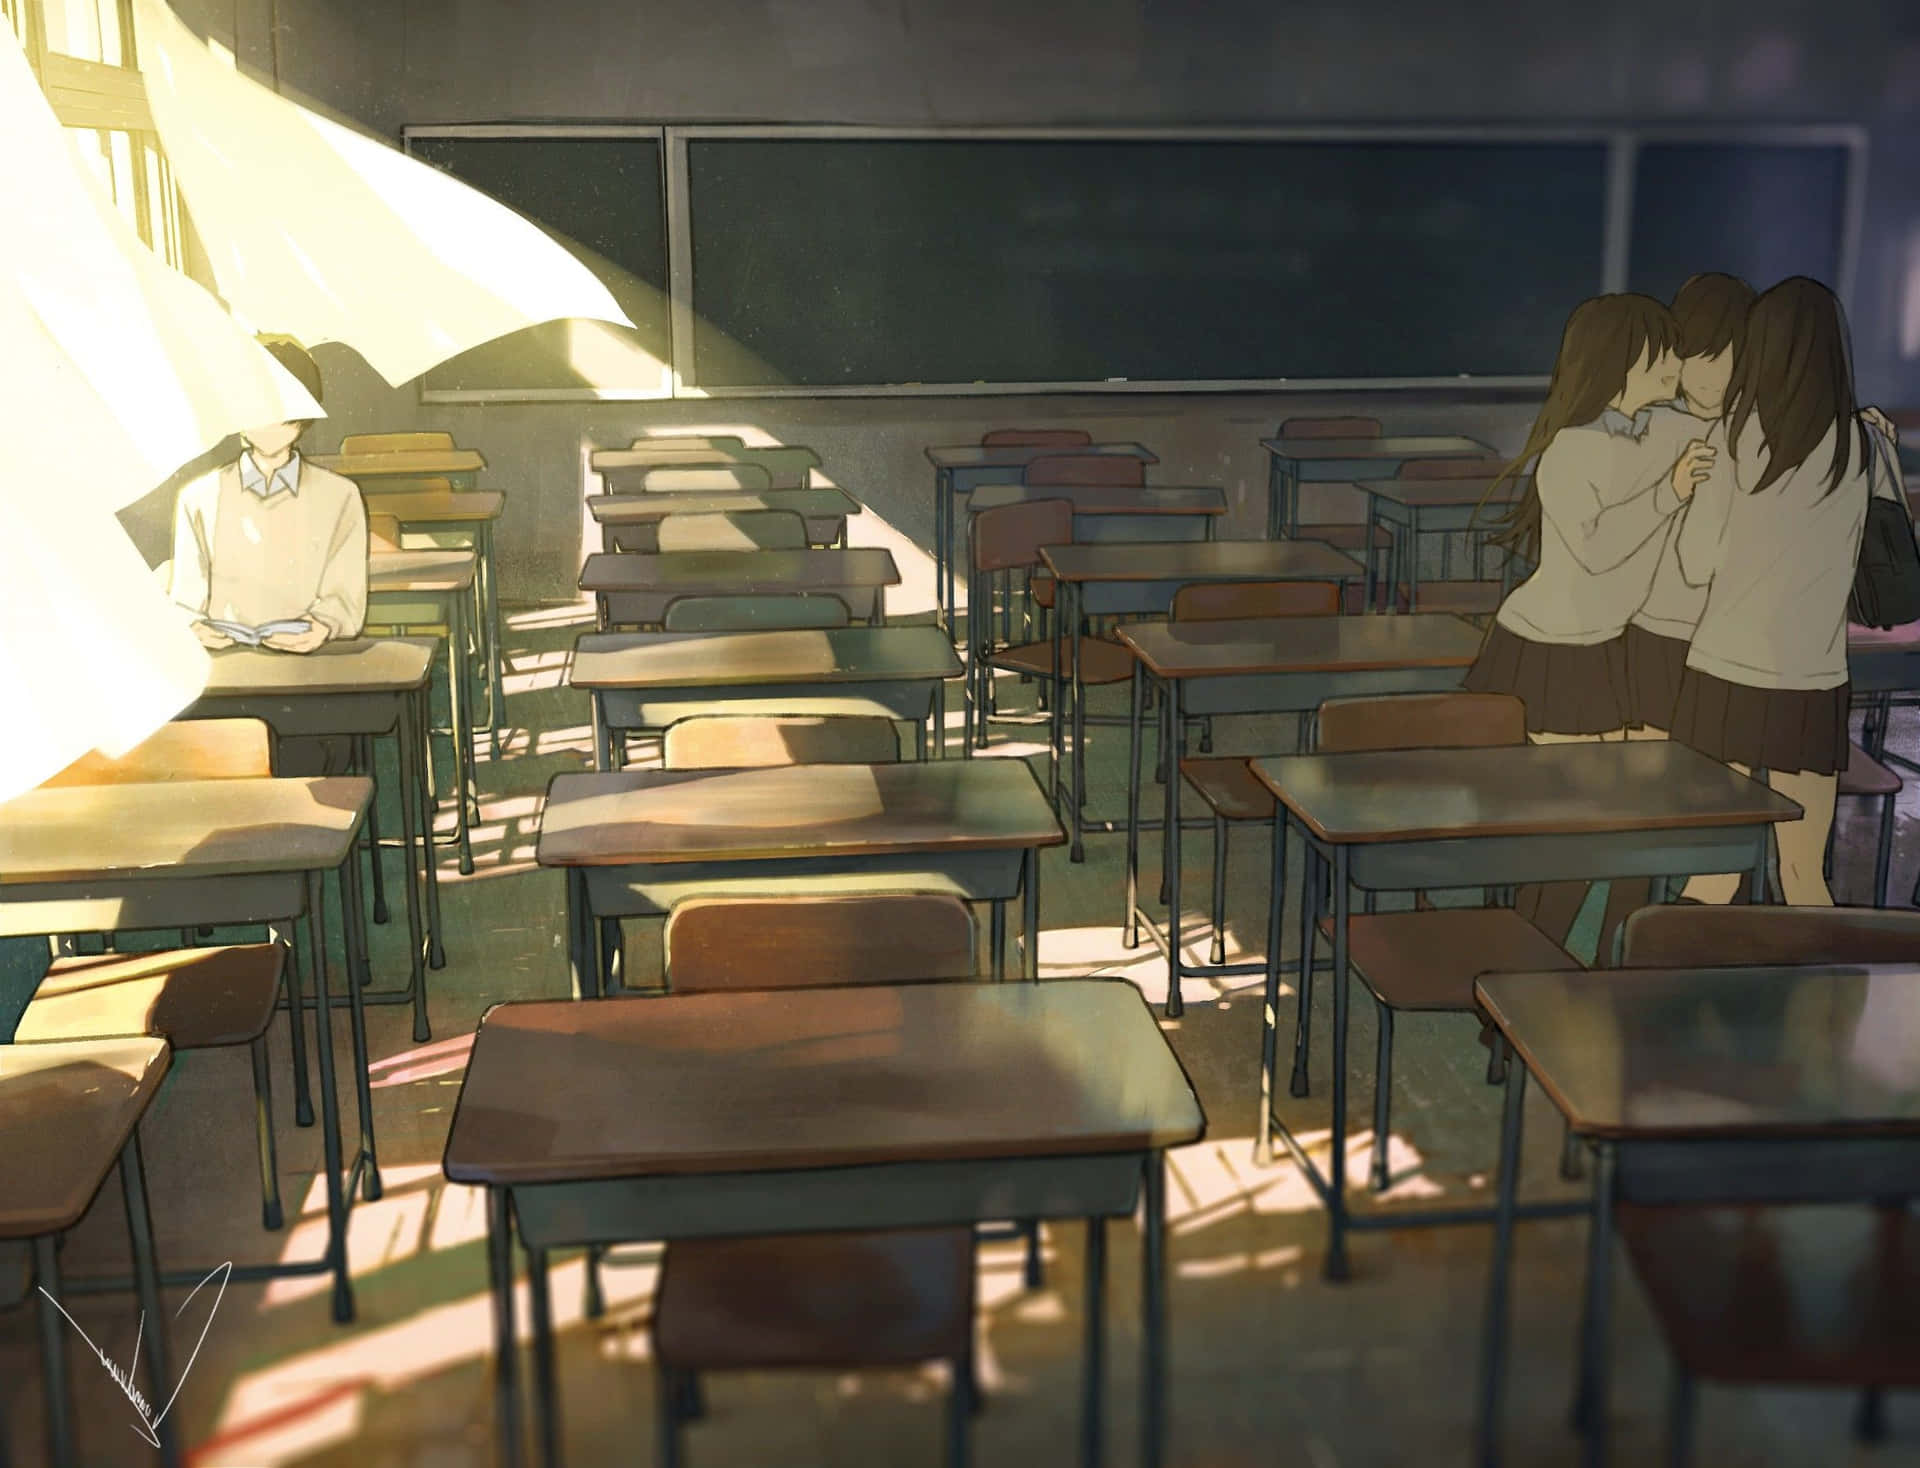 A Study of Cuteness in the Anime Classroom